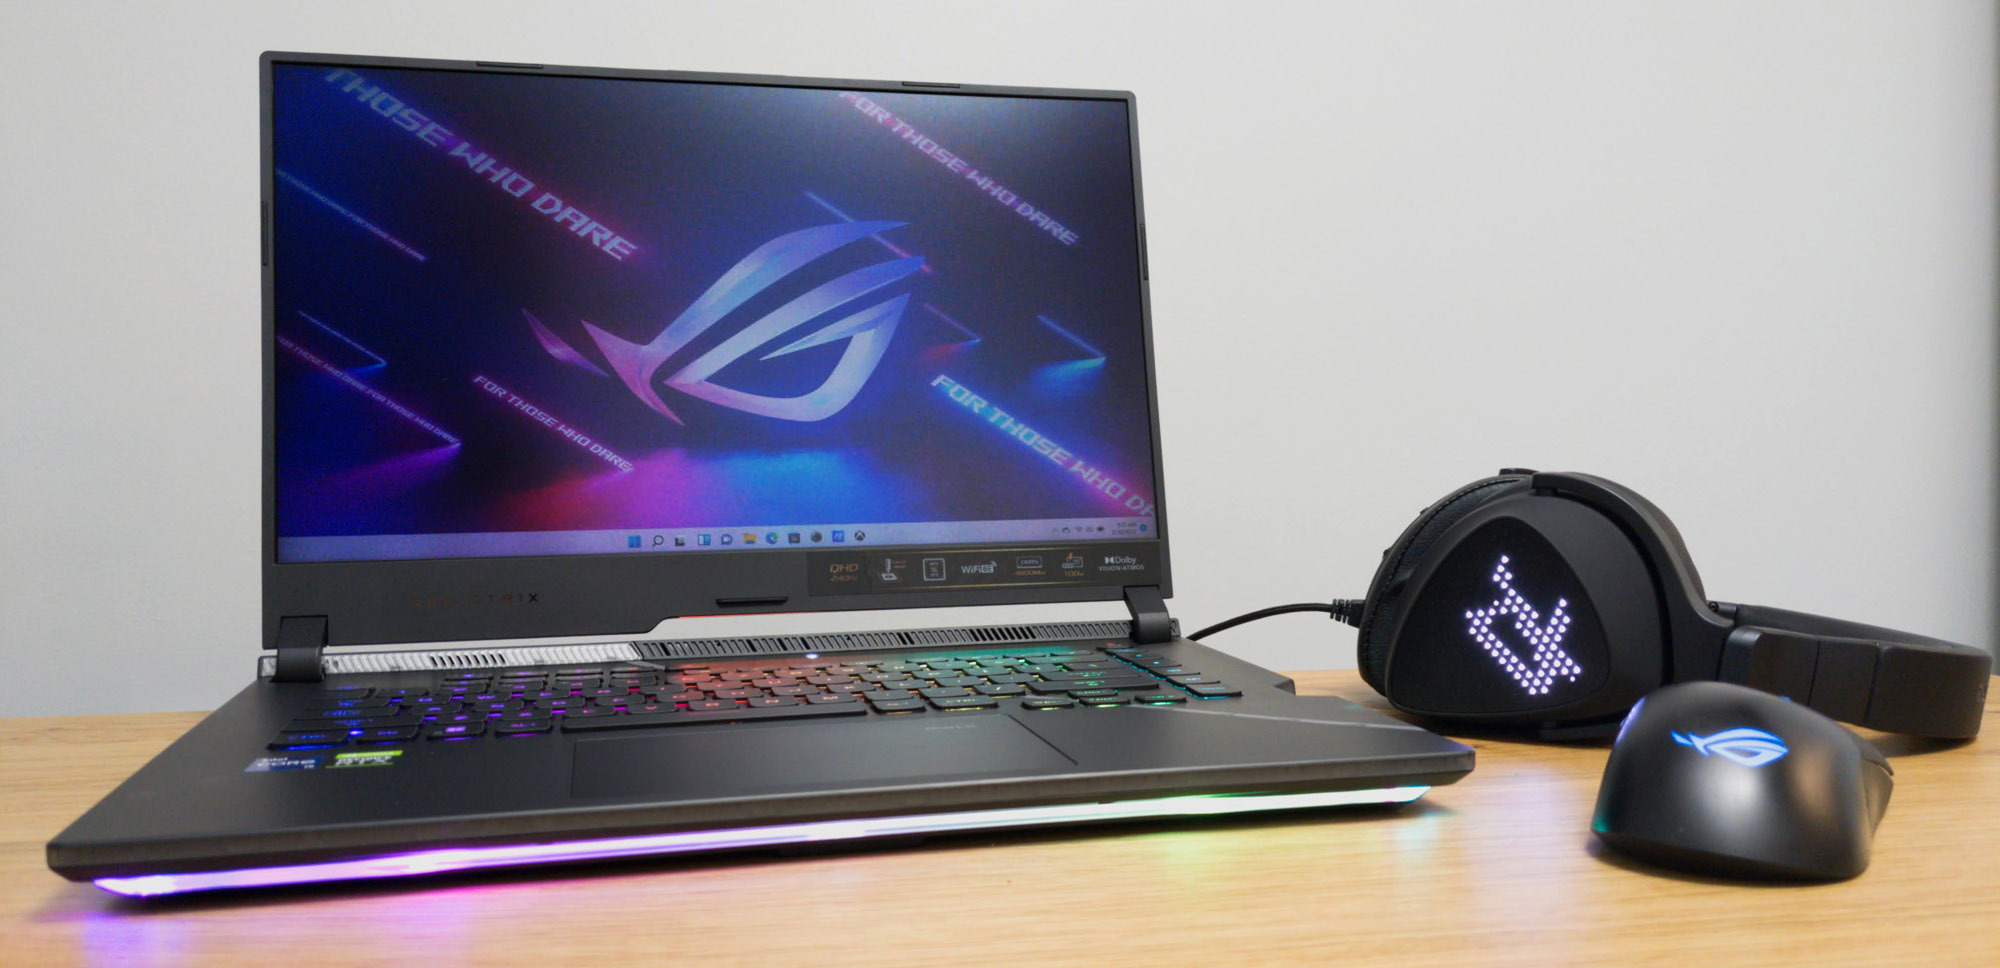 A photo of the 2022 Strix SCAR 15, with a Delta S Animate headset and Keris Wireless mouse.